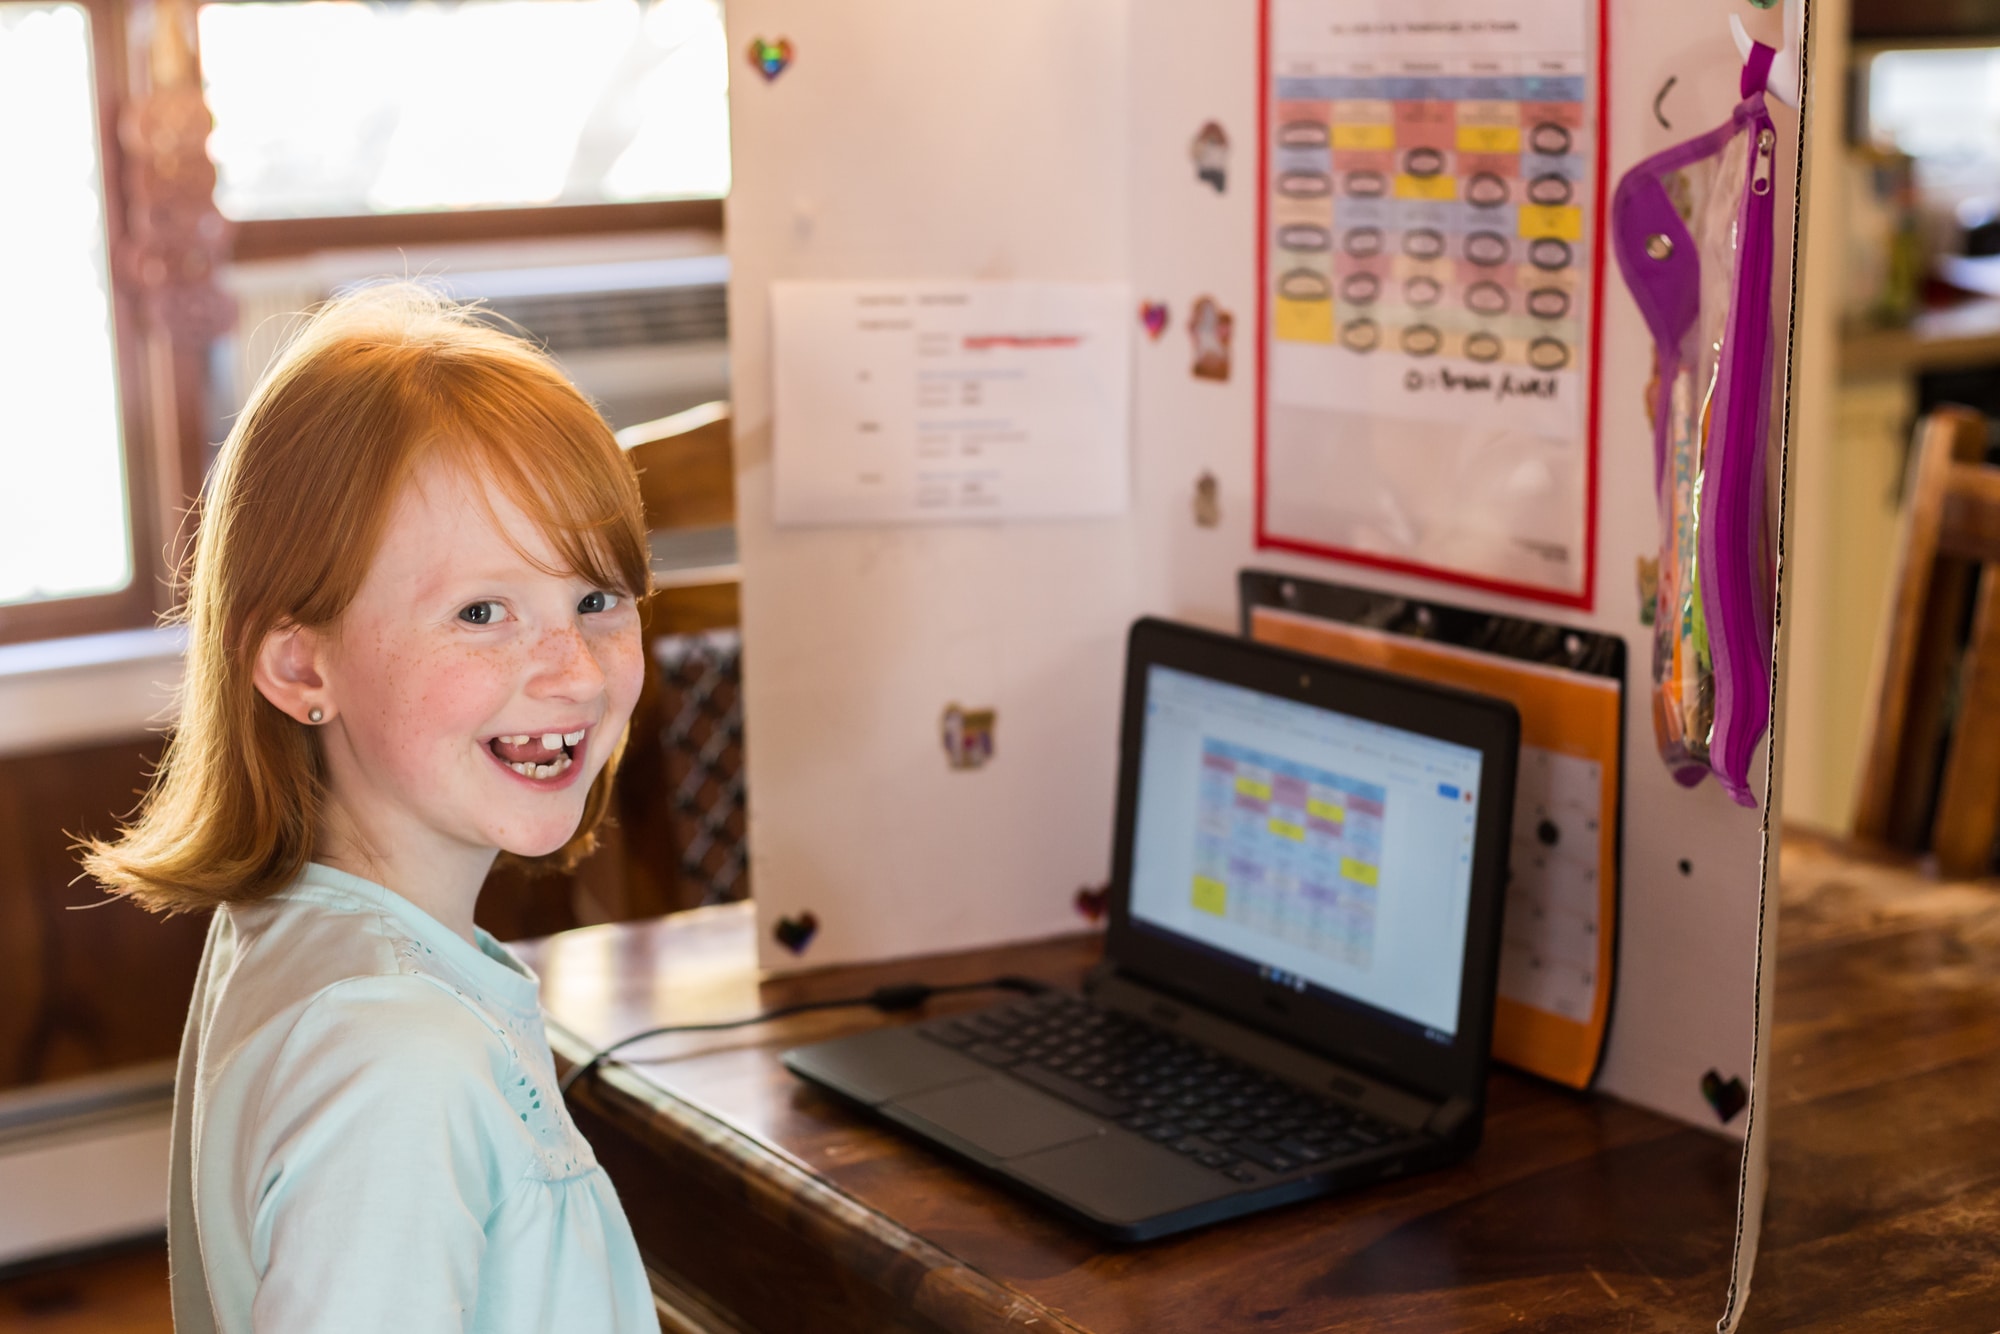 Student smiling at the camera in front of a chromebook